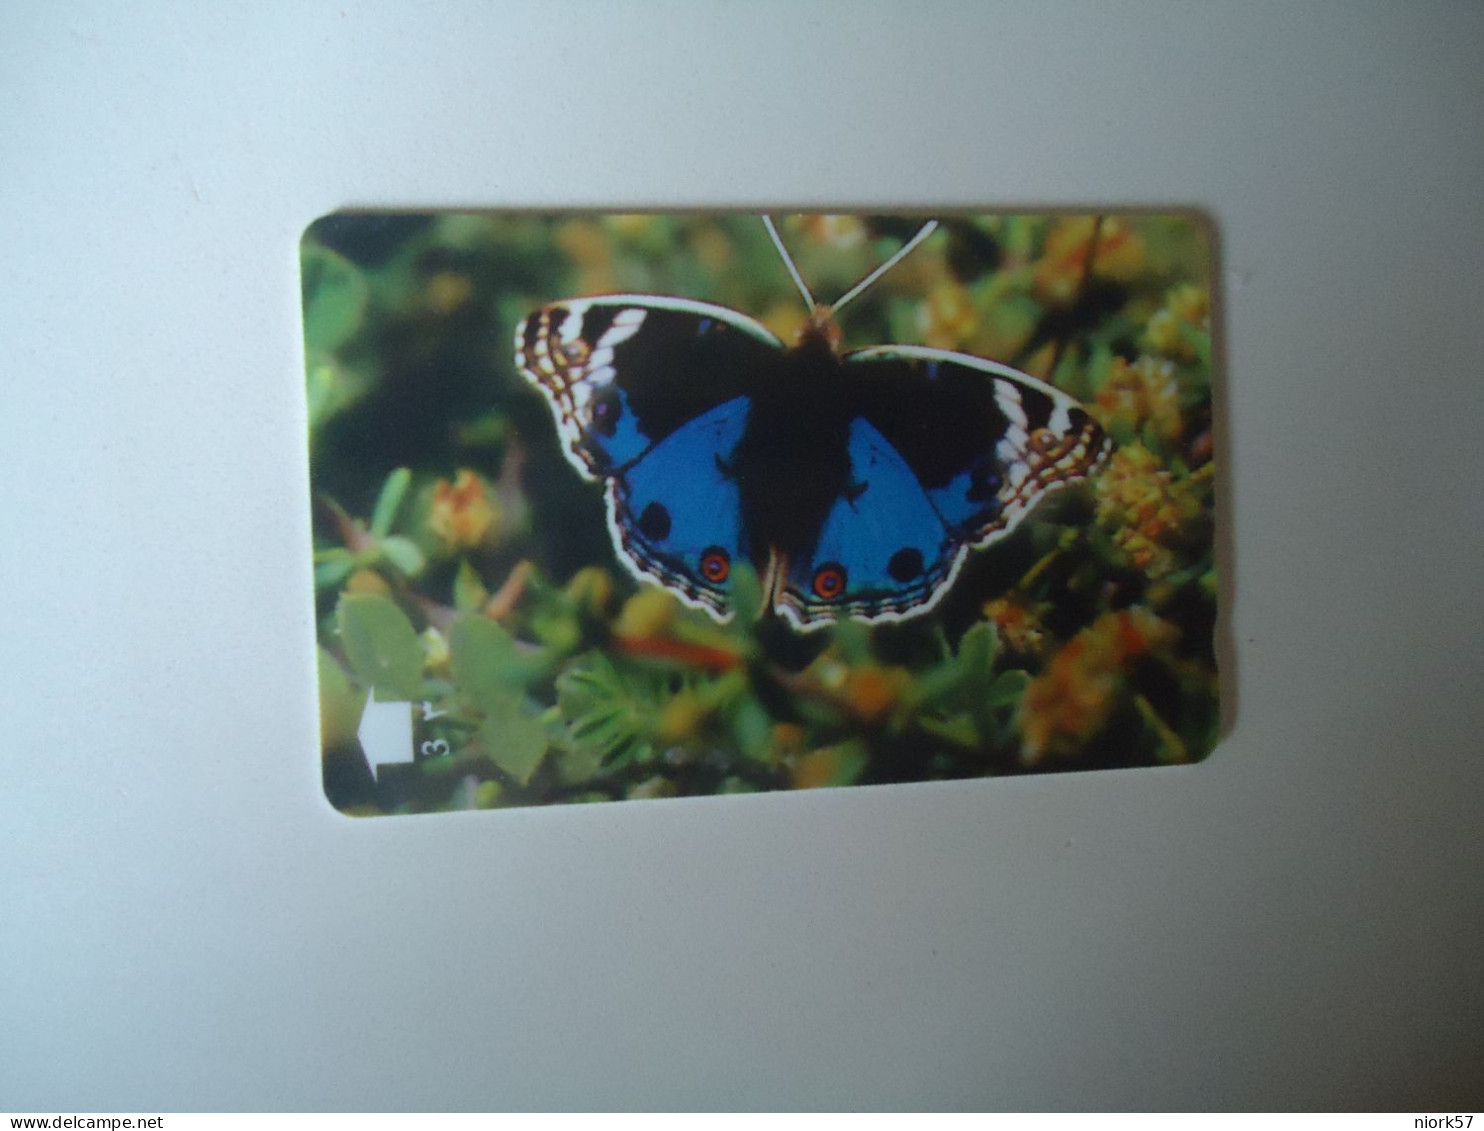 OMAN  USED   PHONECARDS  BUTTERFLIES - Papillons